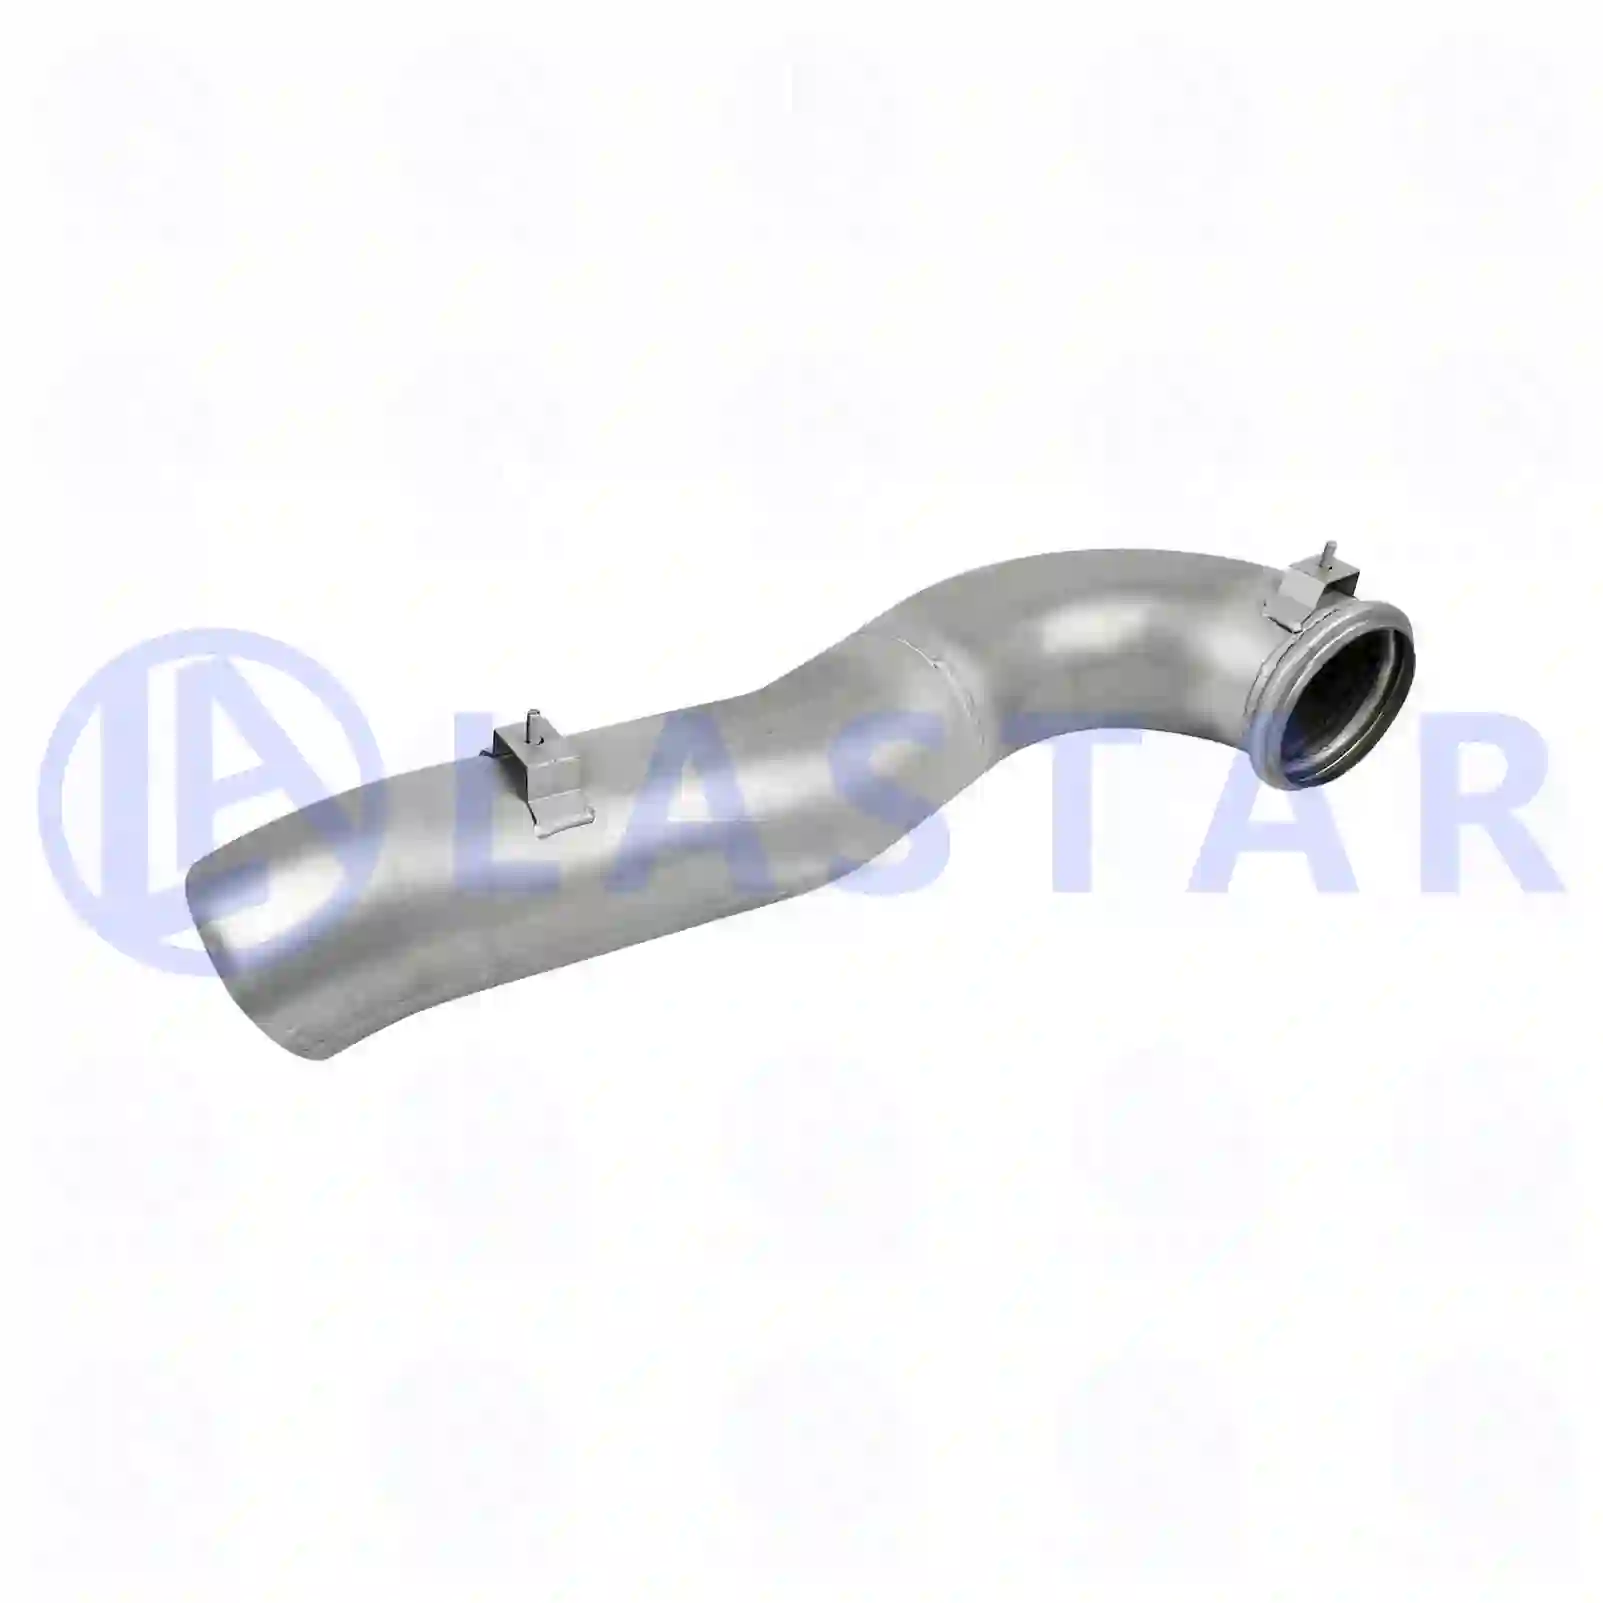 Exhaust pipe, 77706647, 7420720896, 7420868202, 20720896, 20868202, ZG10305-0008 ||  77706647 Lastar Spare Part | Truck Spare Parts, Auotomotive Spare Parts Exhaust pipe, 77706647, 7420720896, 7420868202, 20720896, 20868202, ZG10305-0008 ||  77706647 Lastar Spare Part | Truck Spare Parts, Auotomotive Spare Parts